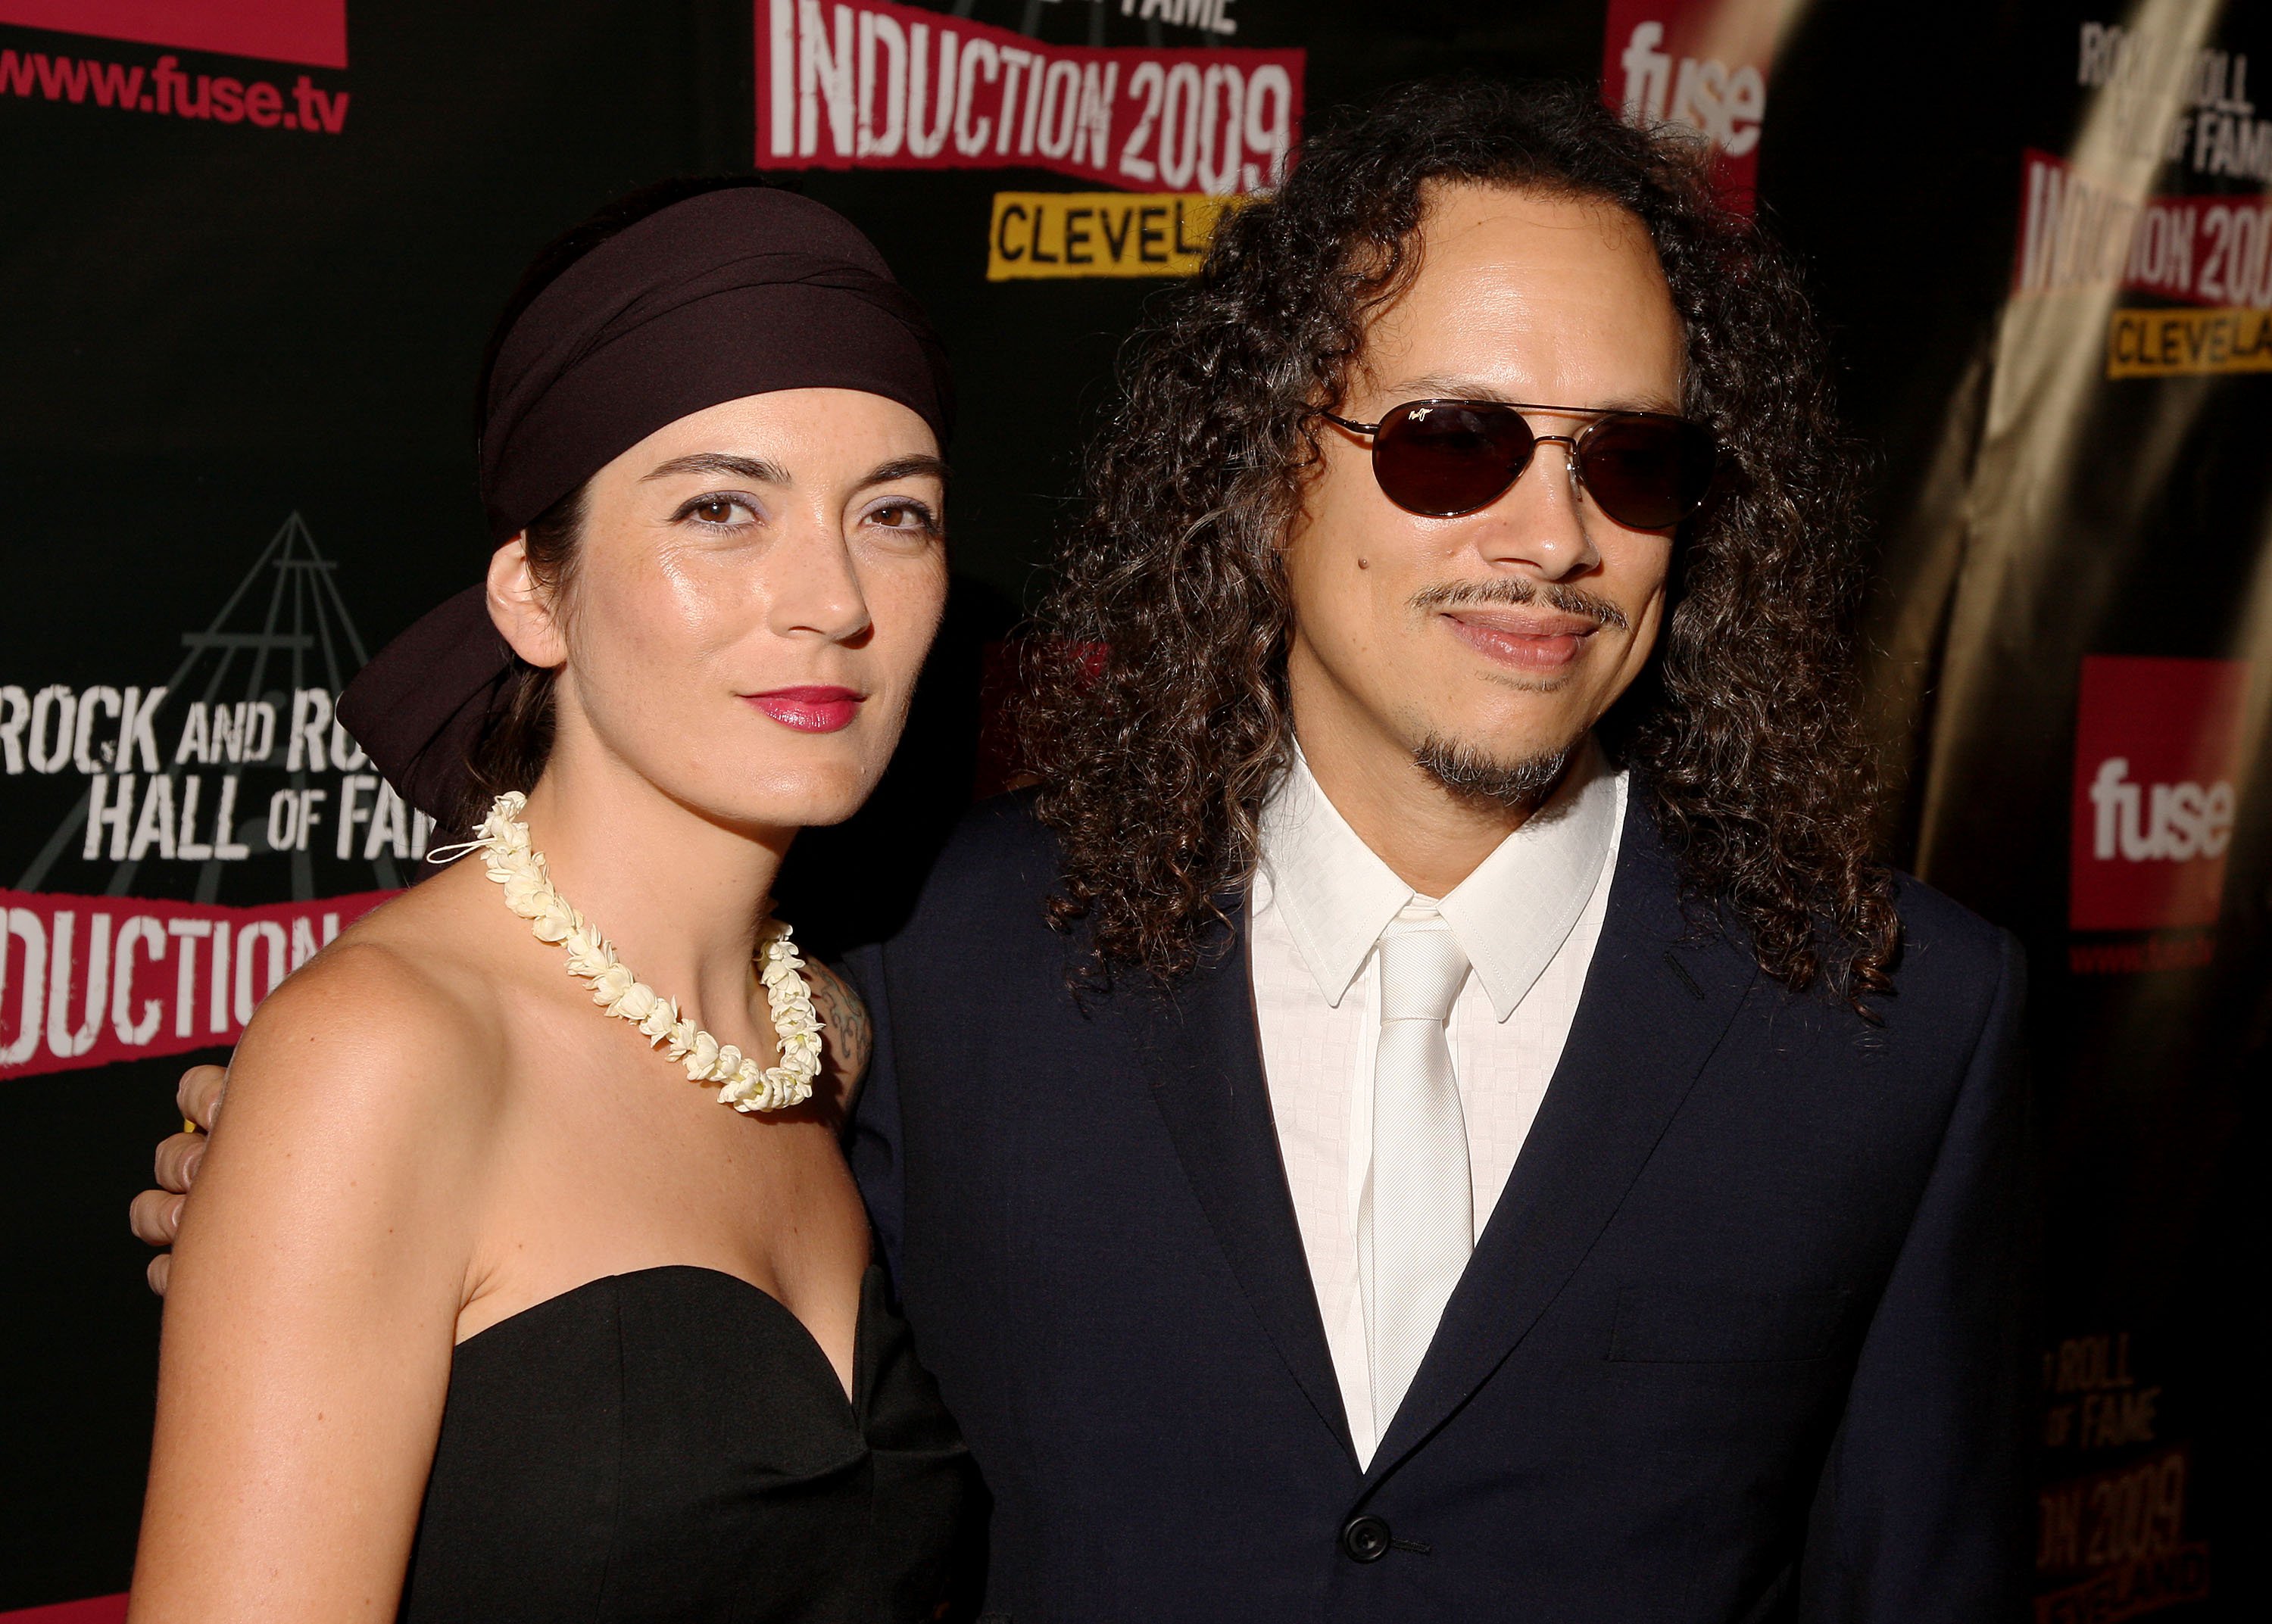 Lani Hammett and Kirk Hammett at the 24th Annual Rock and Roll Hall of Fame Induction Ceremony on April 4, 2009, in Cleveland. | Source: Getty Images